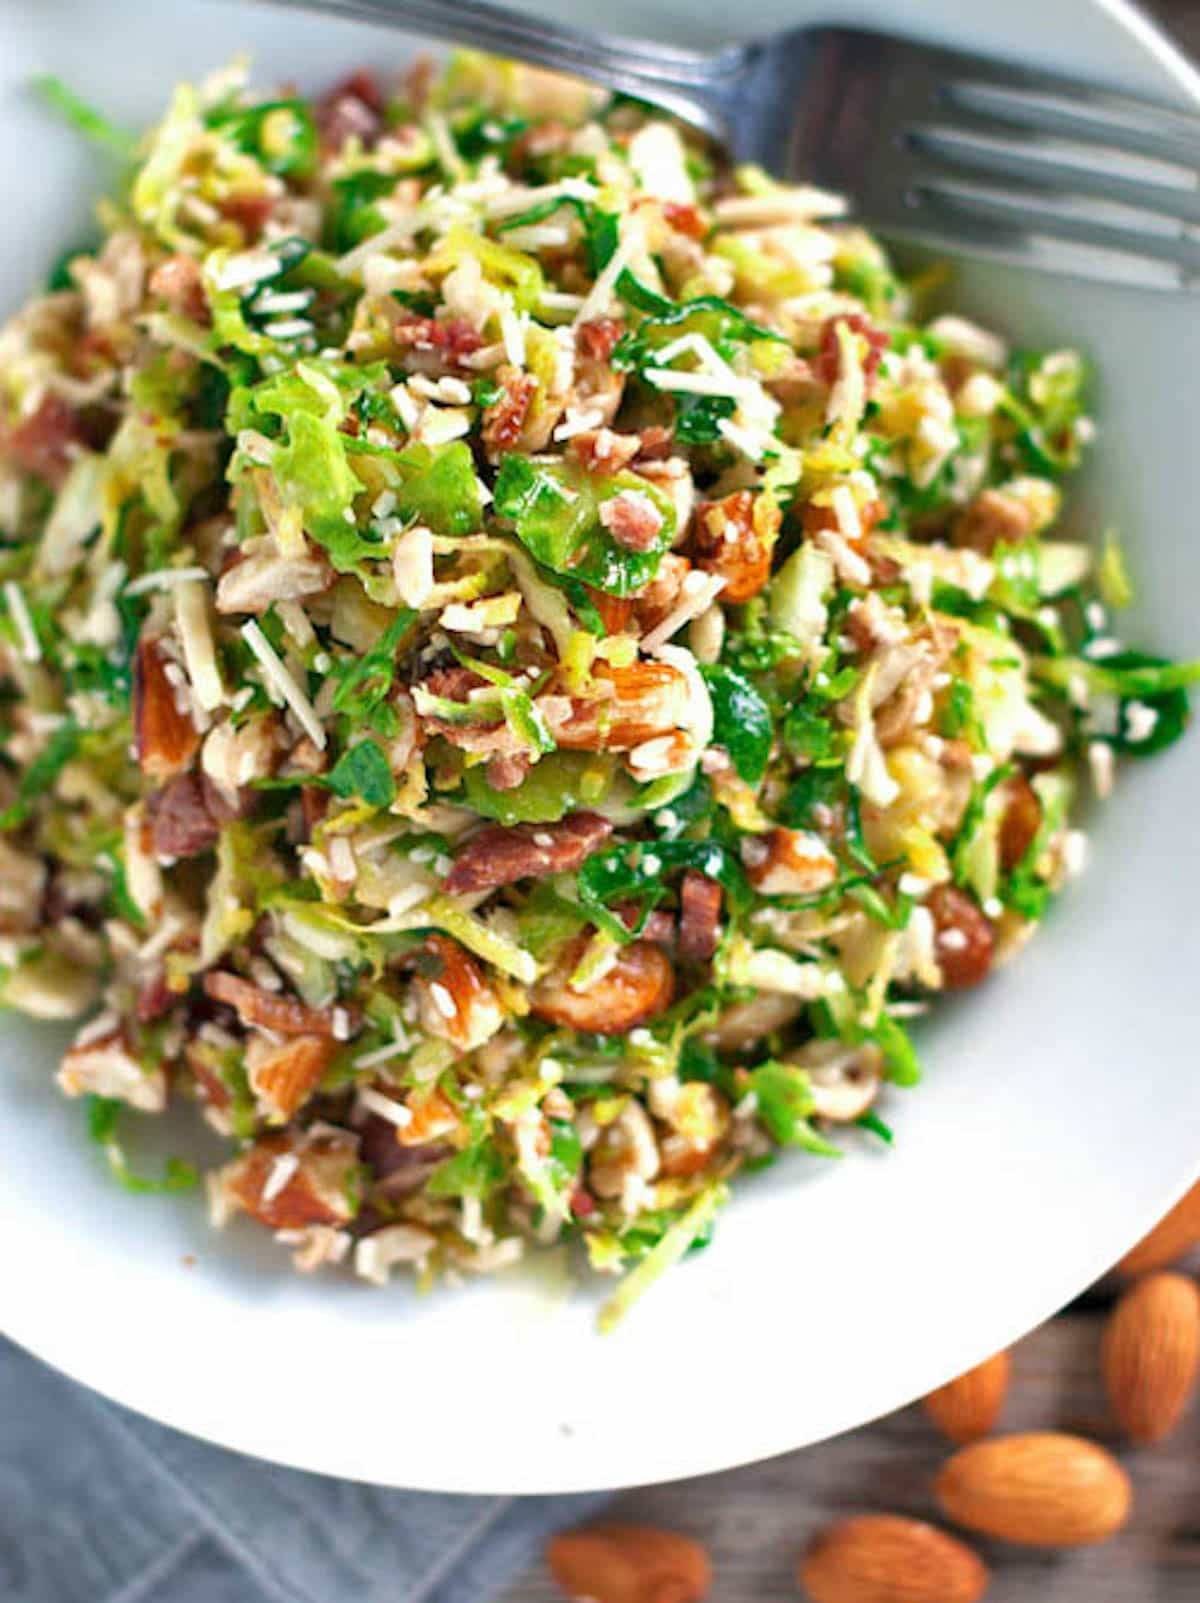 Bacon and brussel sprout salad in a bowl.